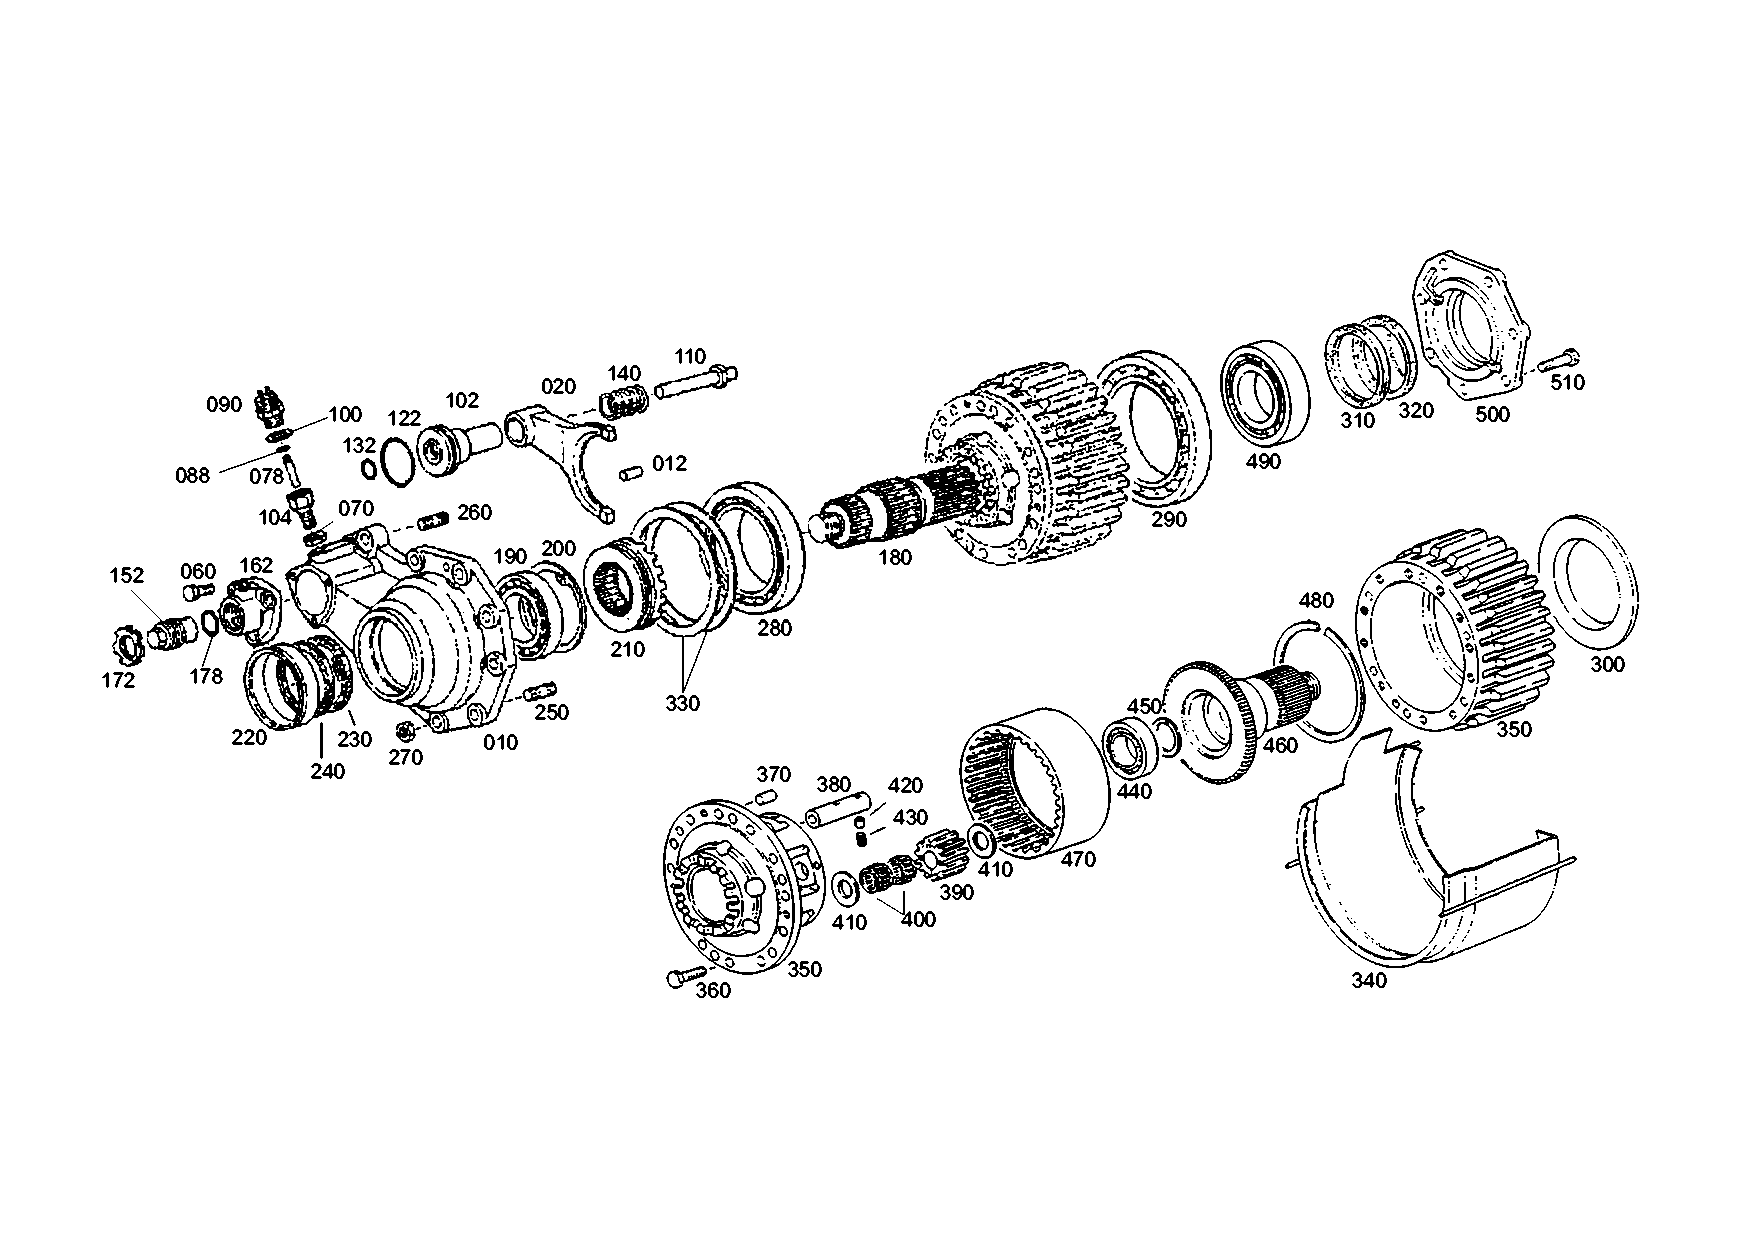 drawing for JOHN DEERE TTZF200847 - OUTPUT SHAFT (figure 2)